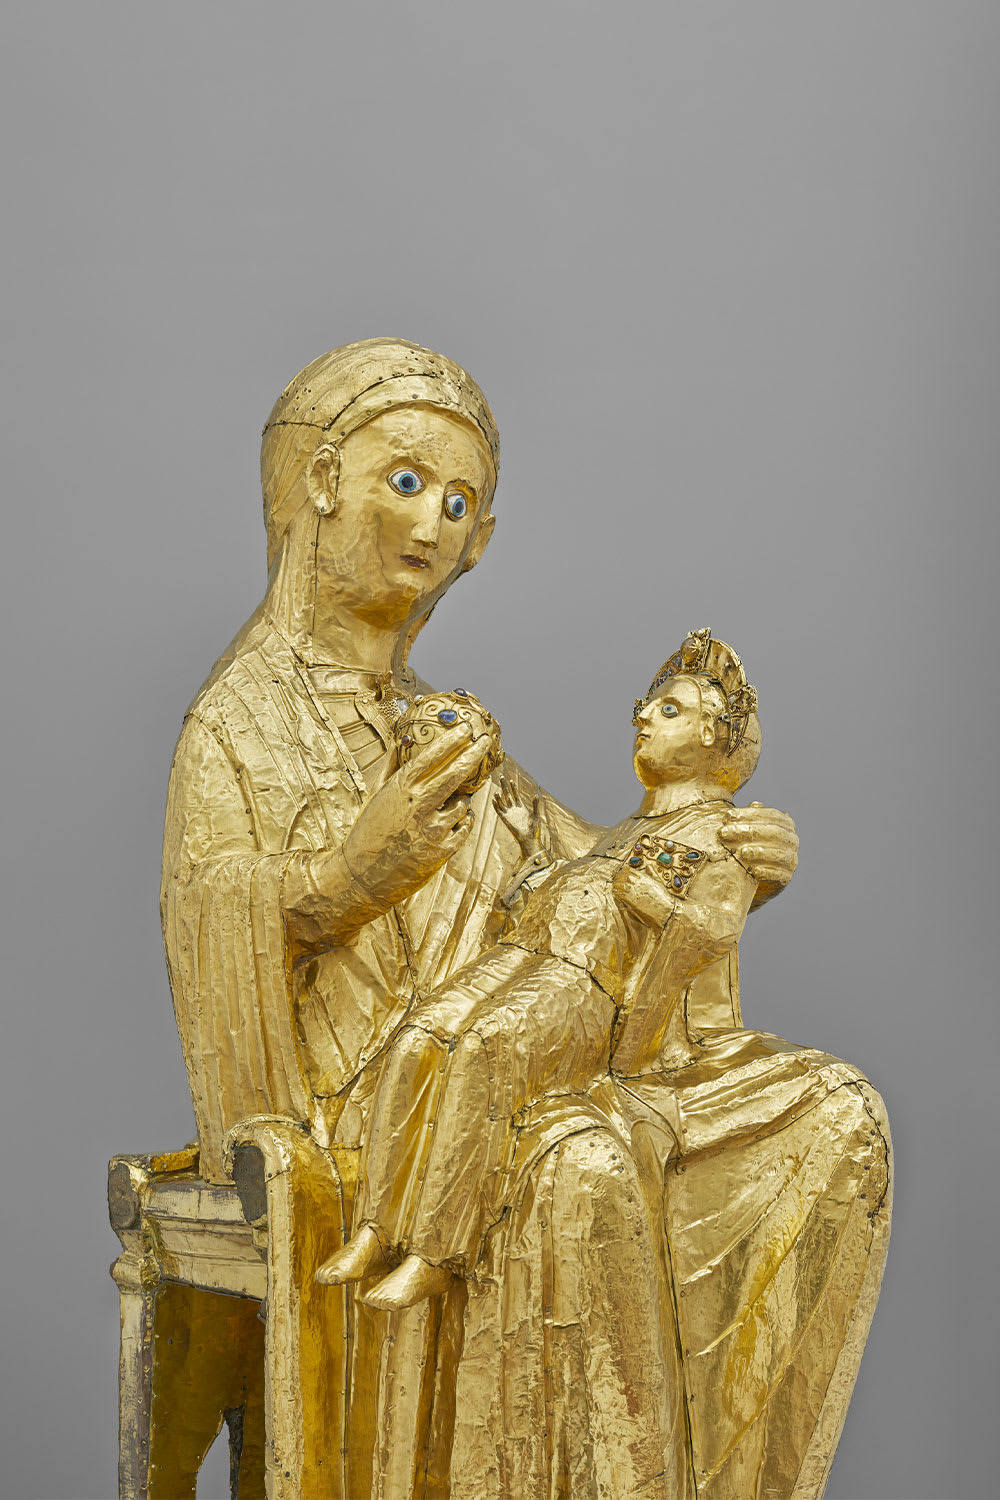 The Golden Madonna of Essen is a sculpture of the Virgin Mary and the infant Jesus. Dated around the year 980, it is the oldest known sculpture of the Madonna. Now part of the treasury of Essen Cathedral in North Rhine-Westphalia, Germany